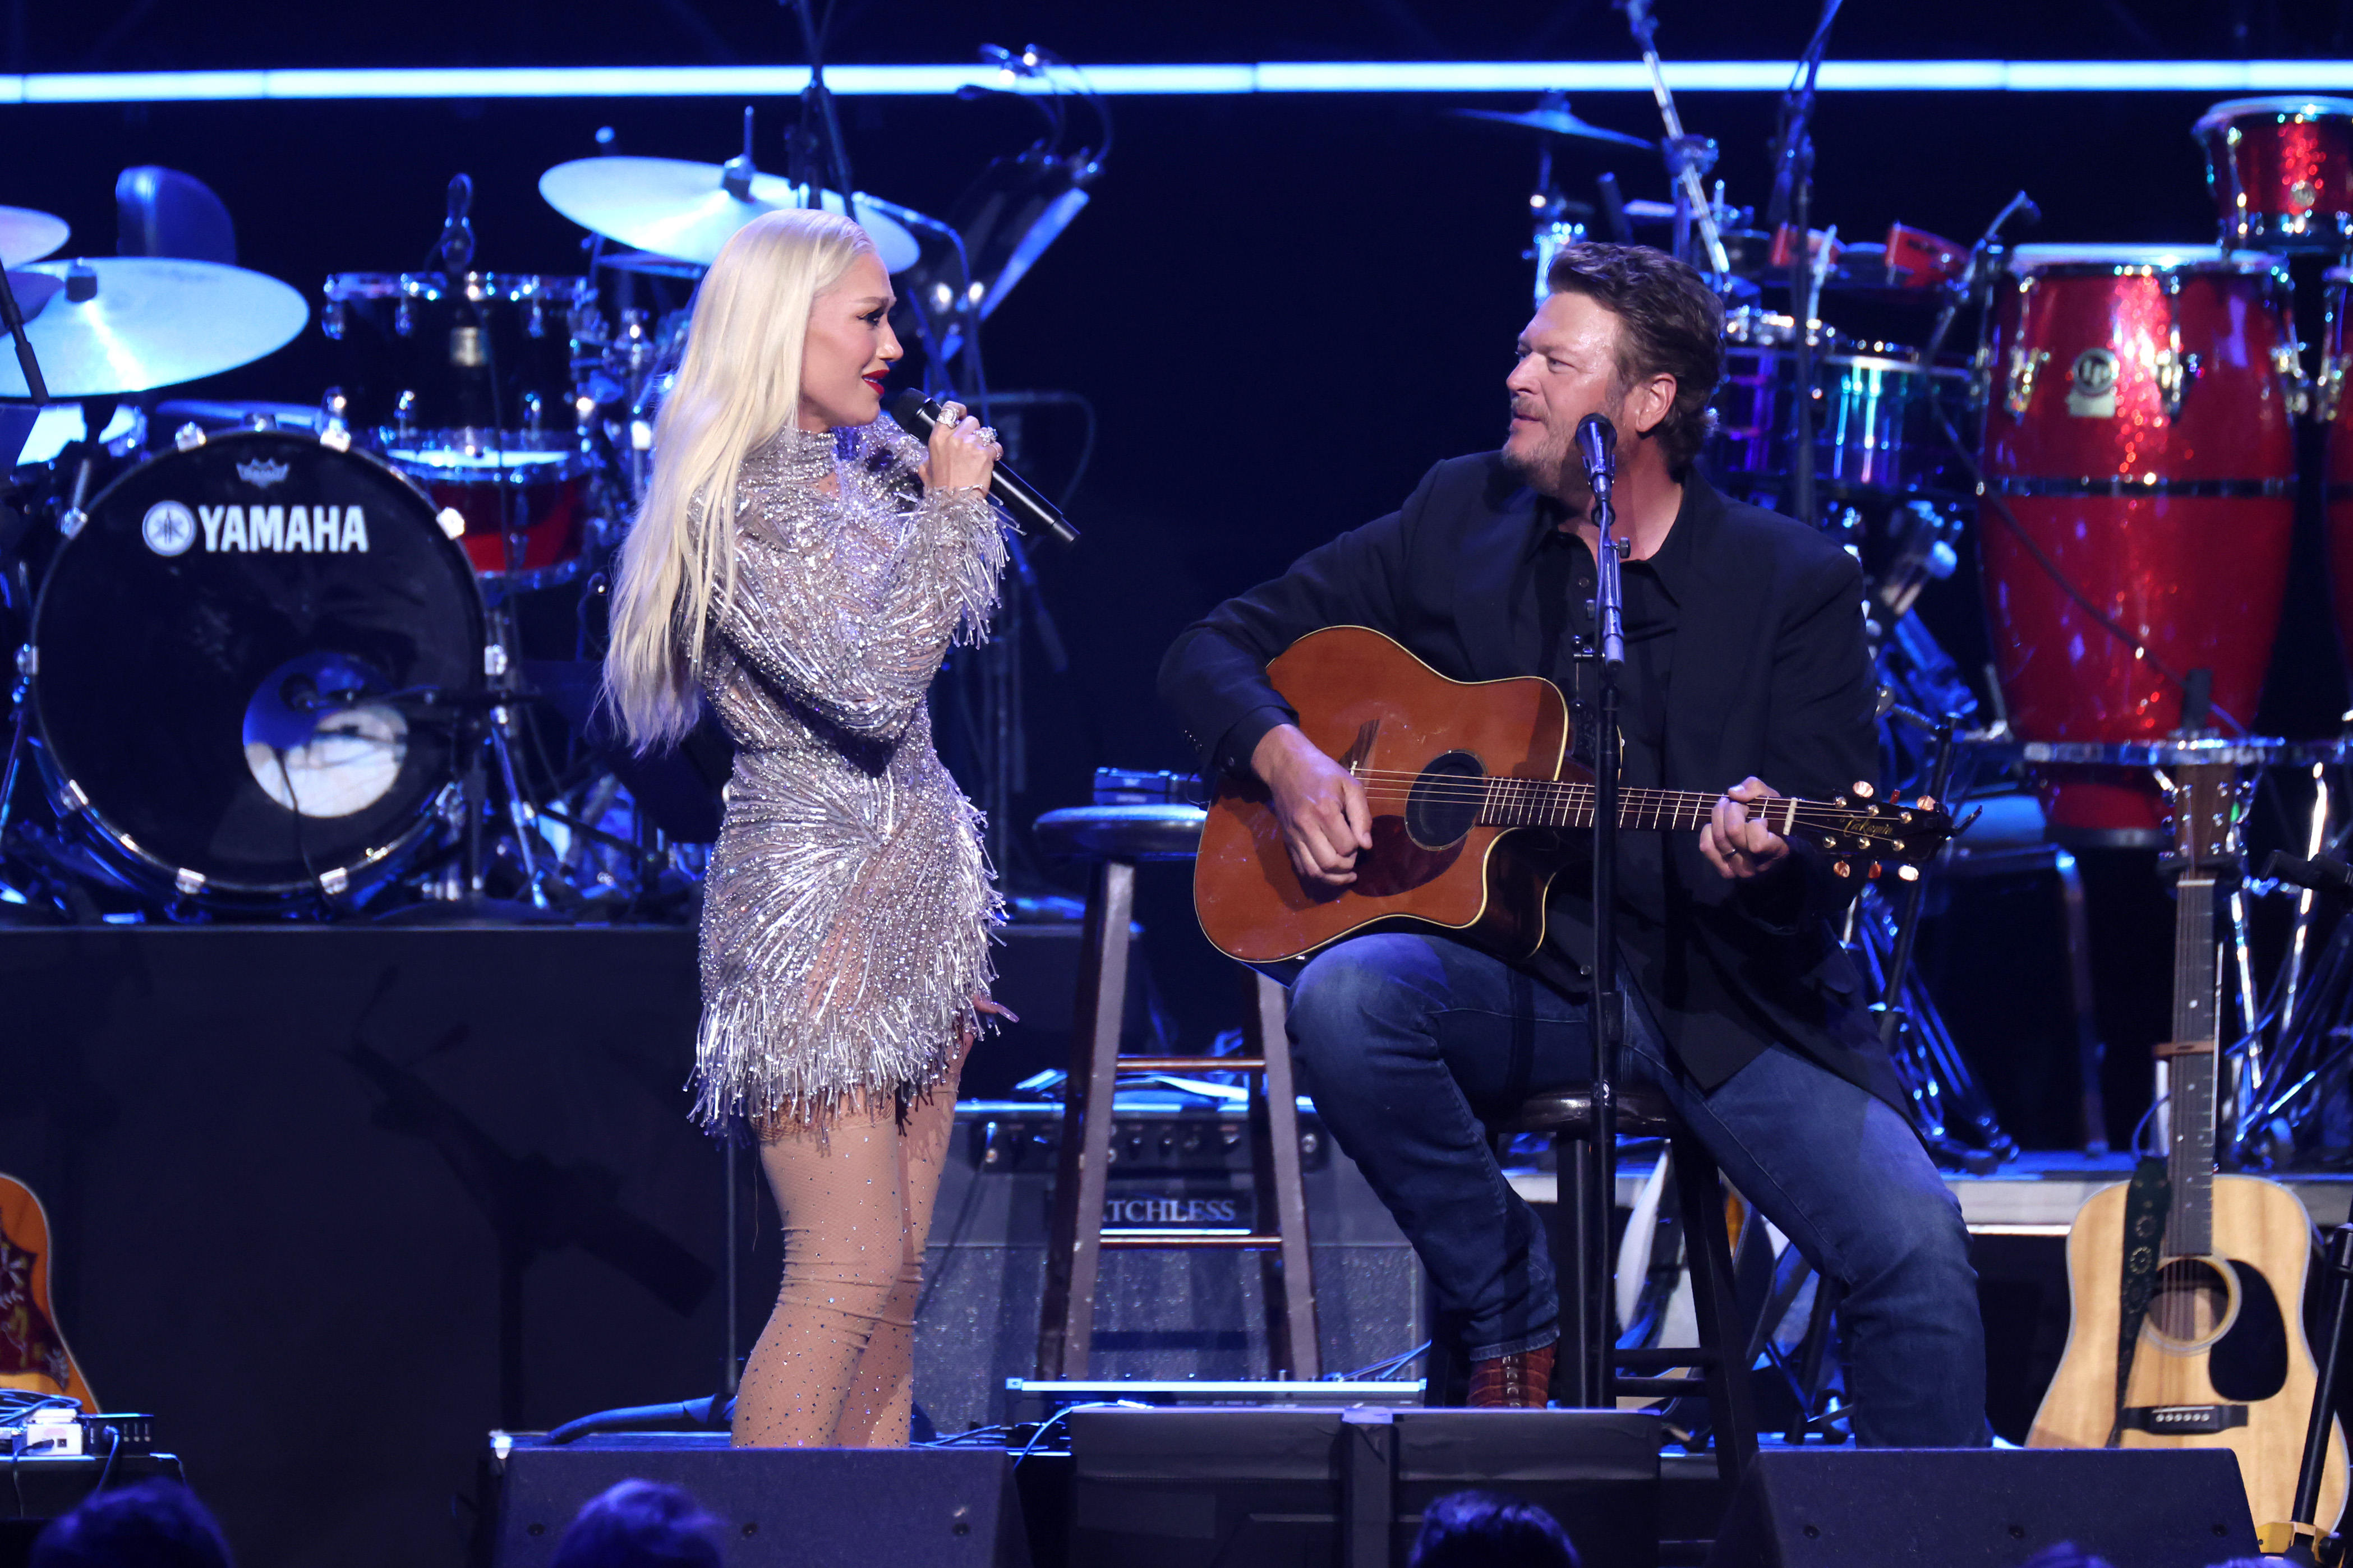 Blake joked that Gwen couldn't get out of it and that he was 'going to make her sing'